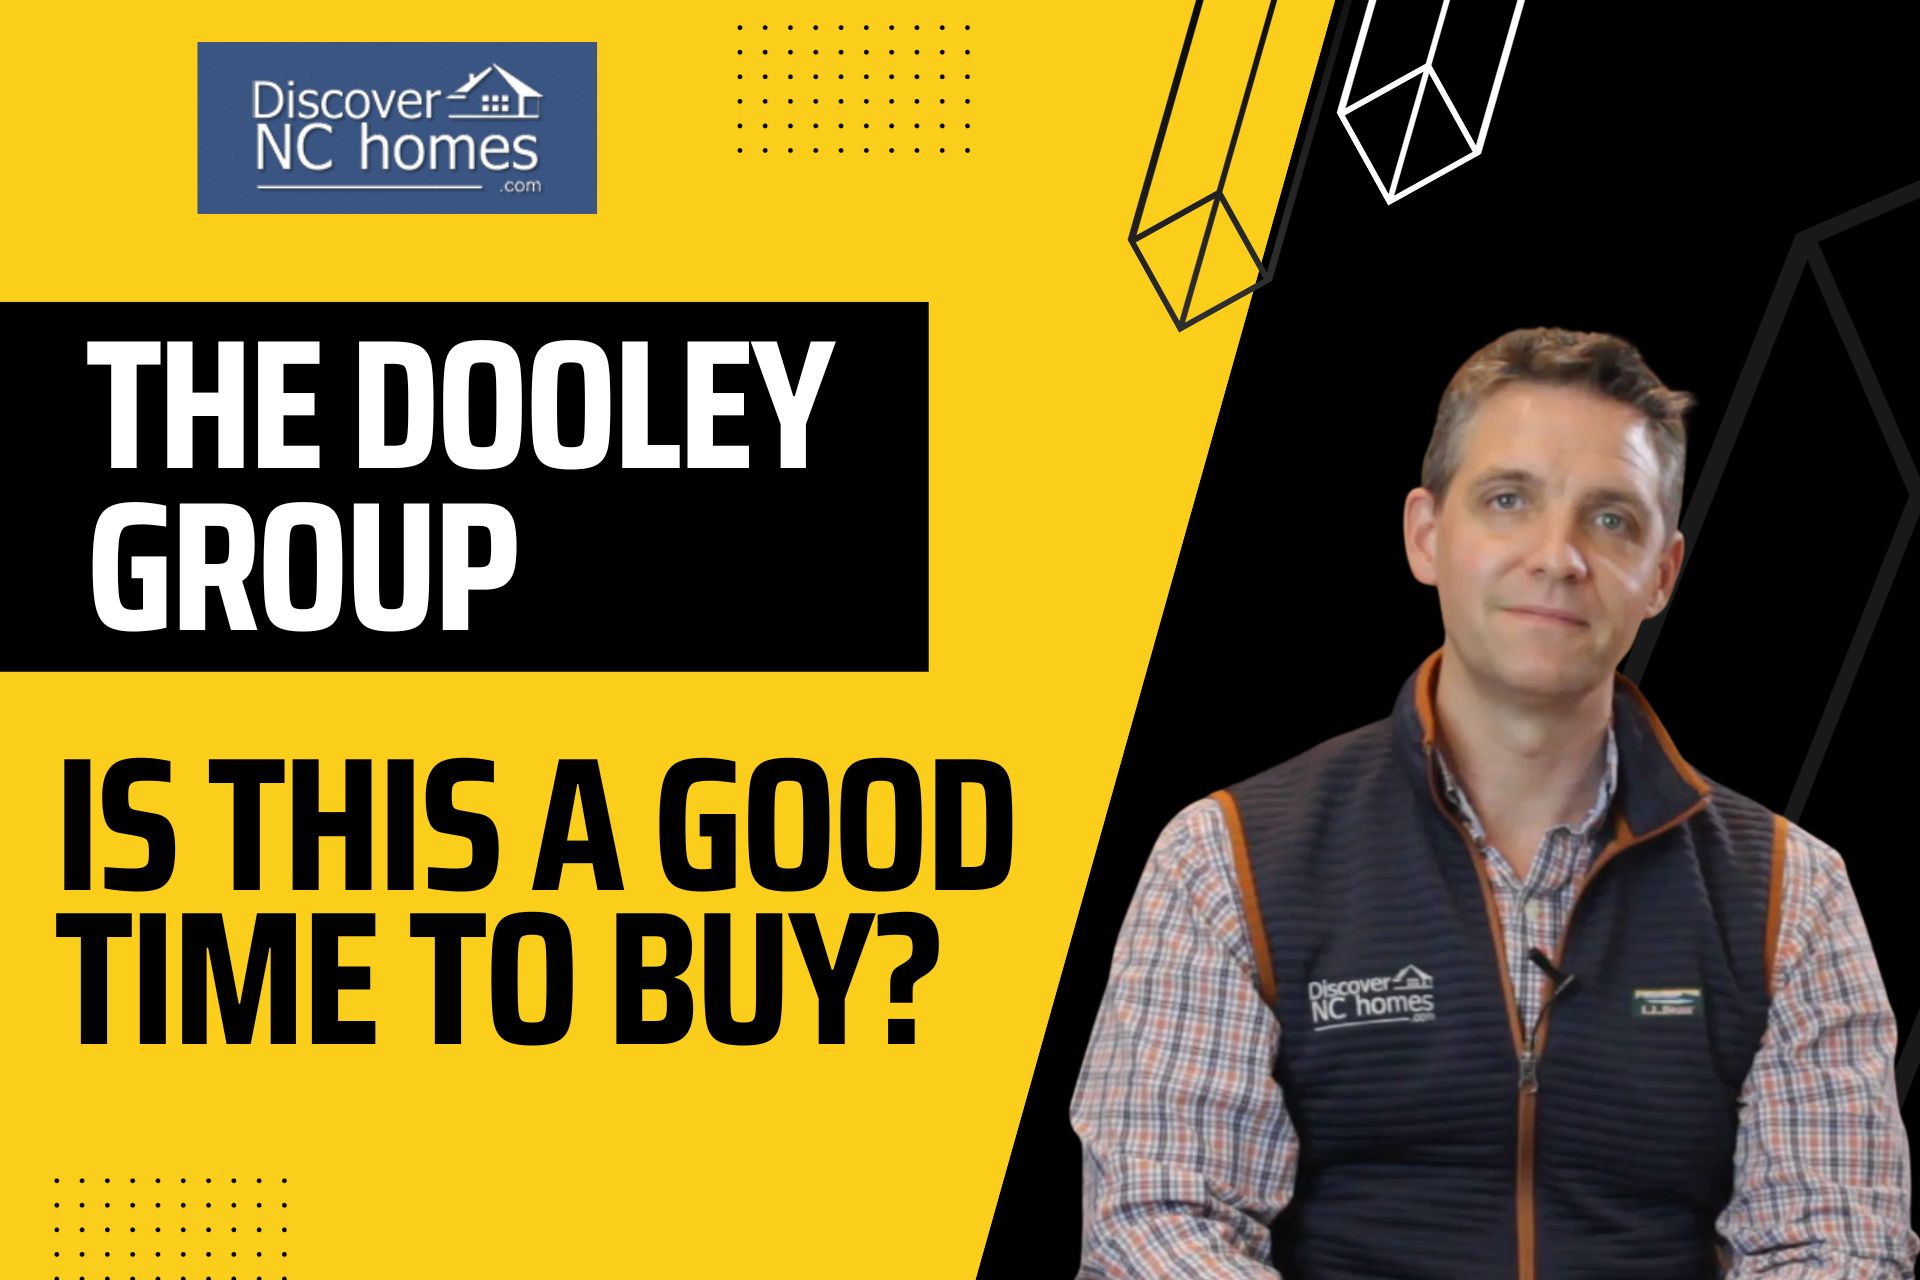 The Dooley Group - Is this a good time to buy?